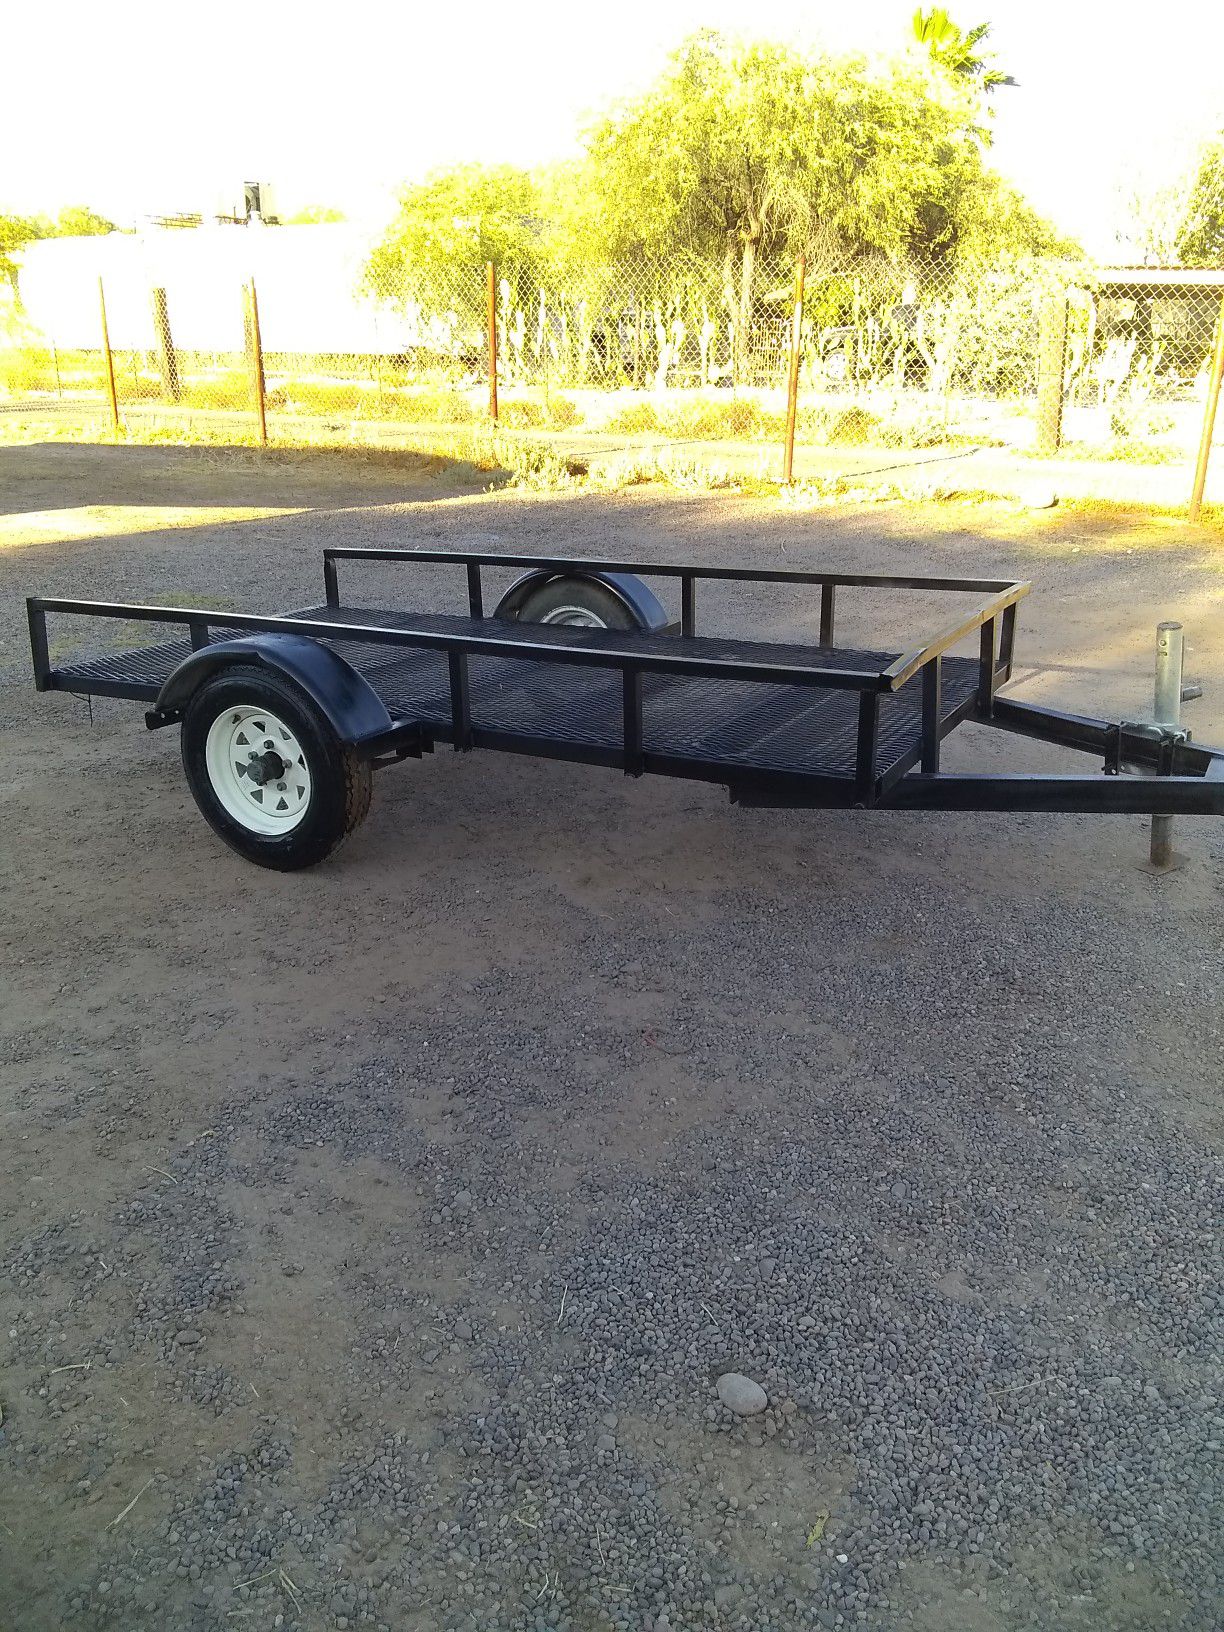 Trailer for sale 4x8 $550